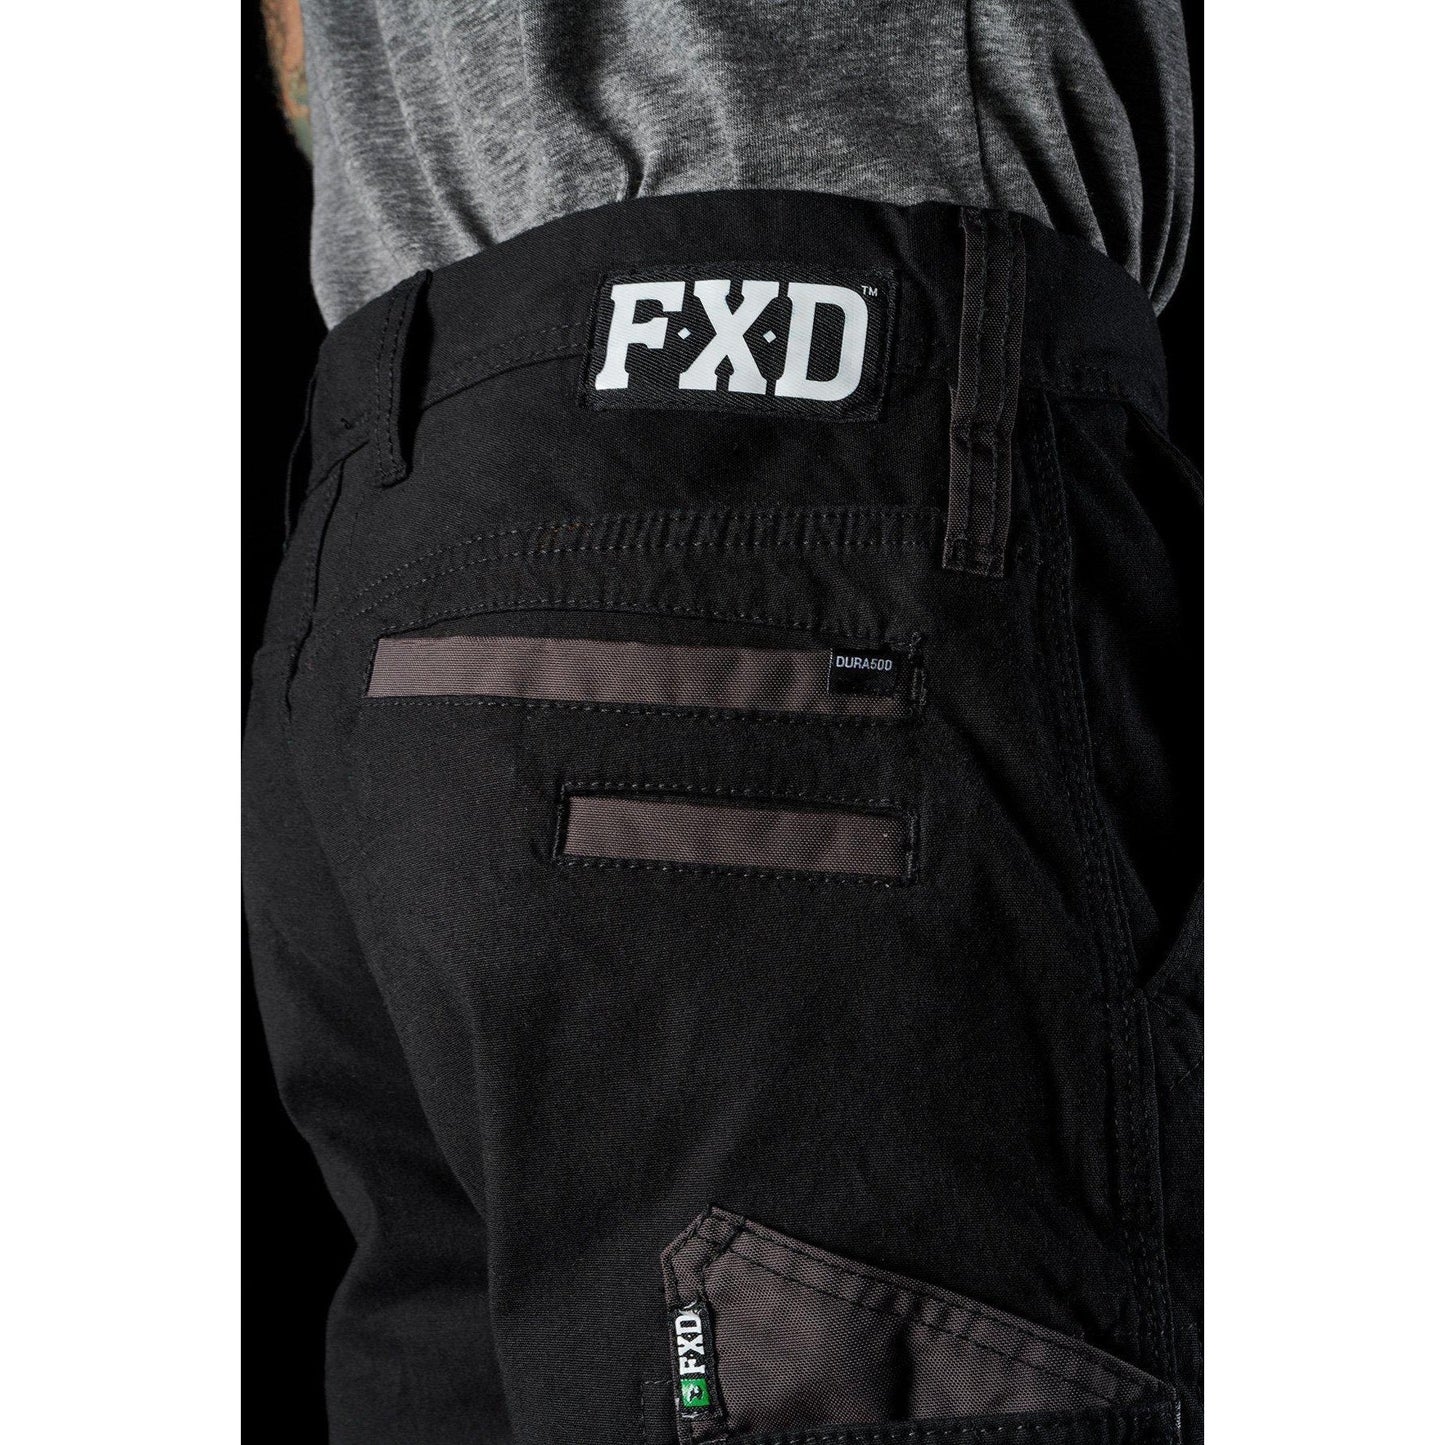 FXD Work Pant Cuff - WP-4 | Blue Heeler Boots